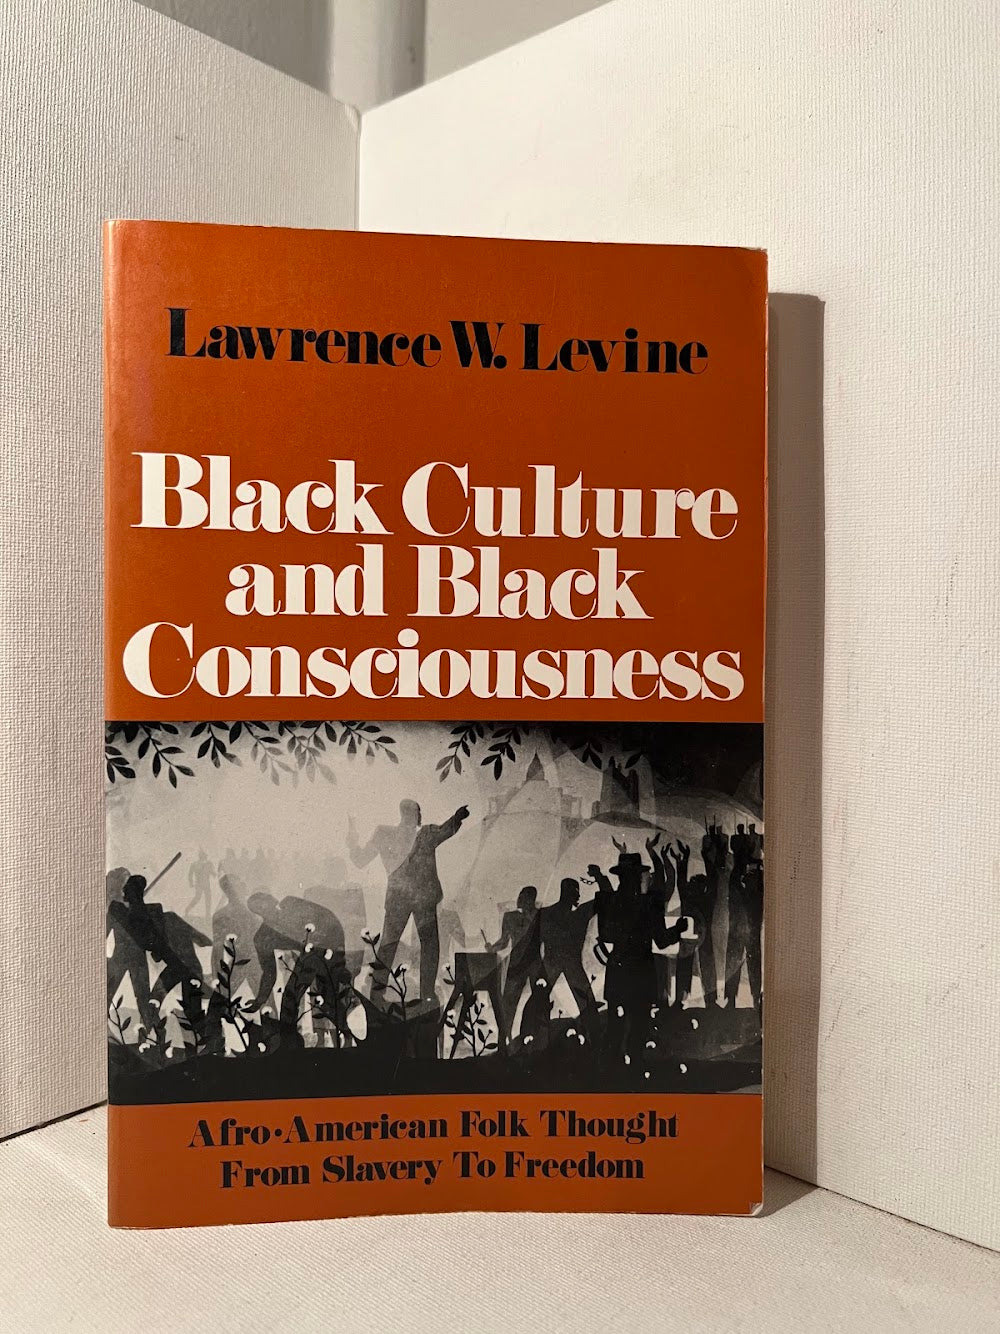 Black Culture and Black Consciousness by Lawrence W. Levine